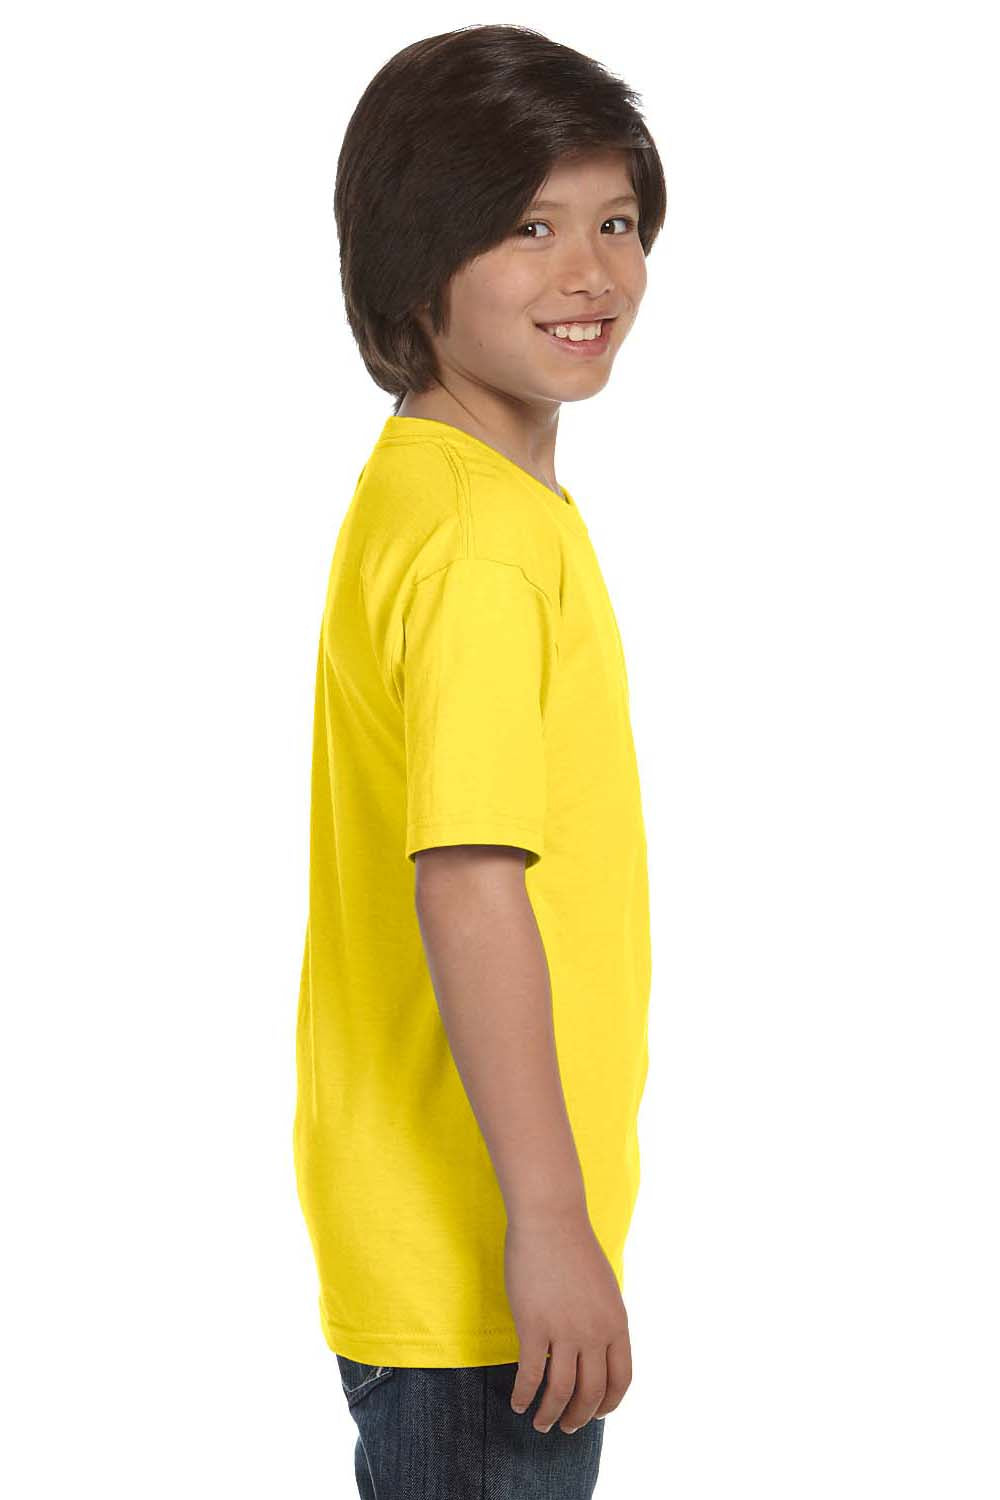 Hanes 5380 Youth Beefy-T Short Sleeve Crewneck T-Shirt Yellow Side